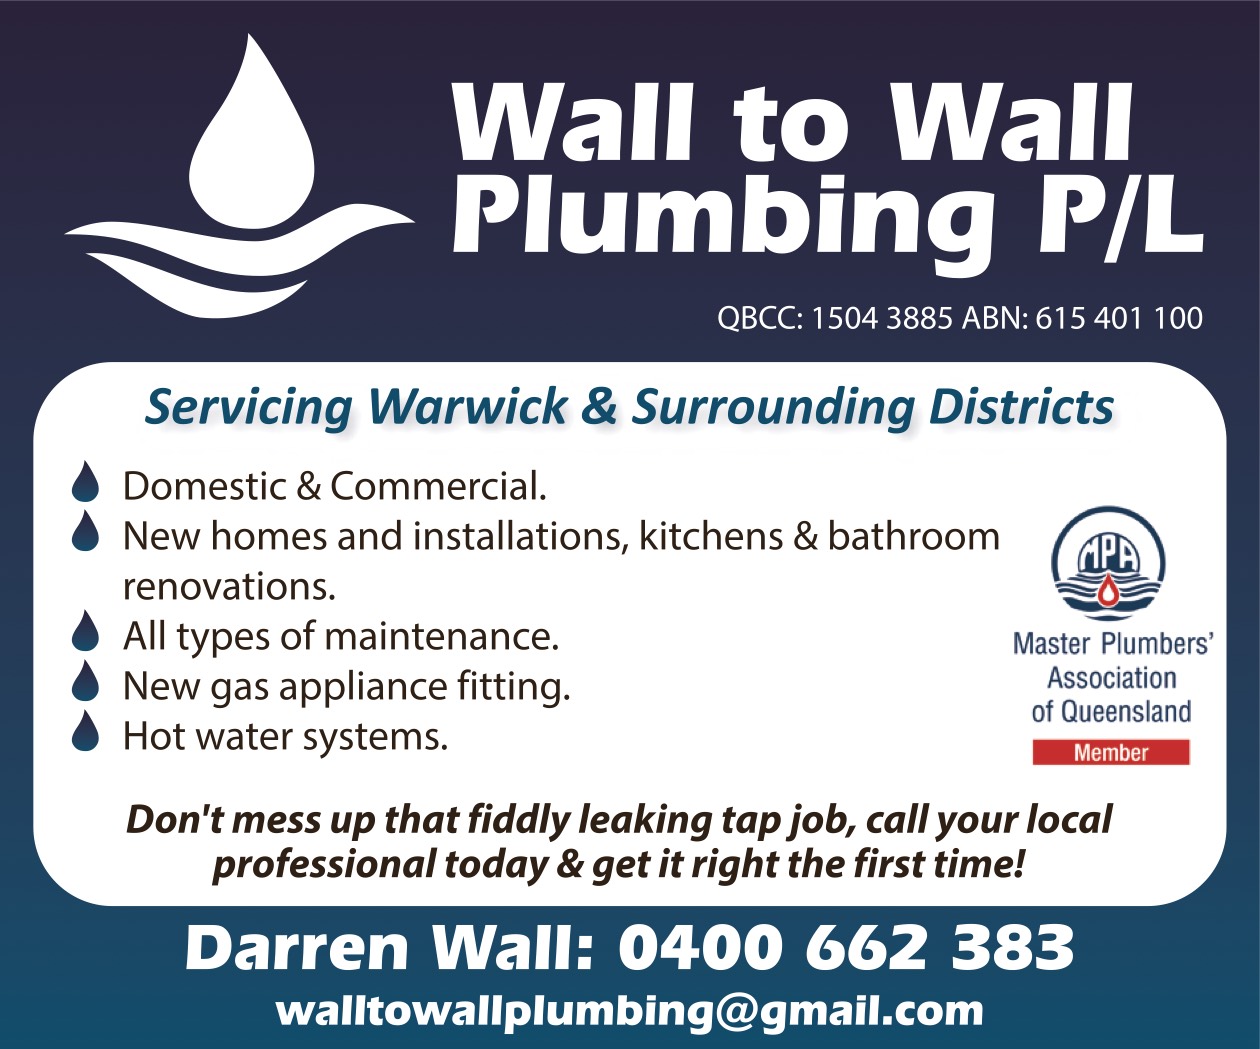 Wall to Wall Plumbing Pty Ltd - Drainers